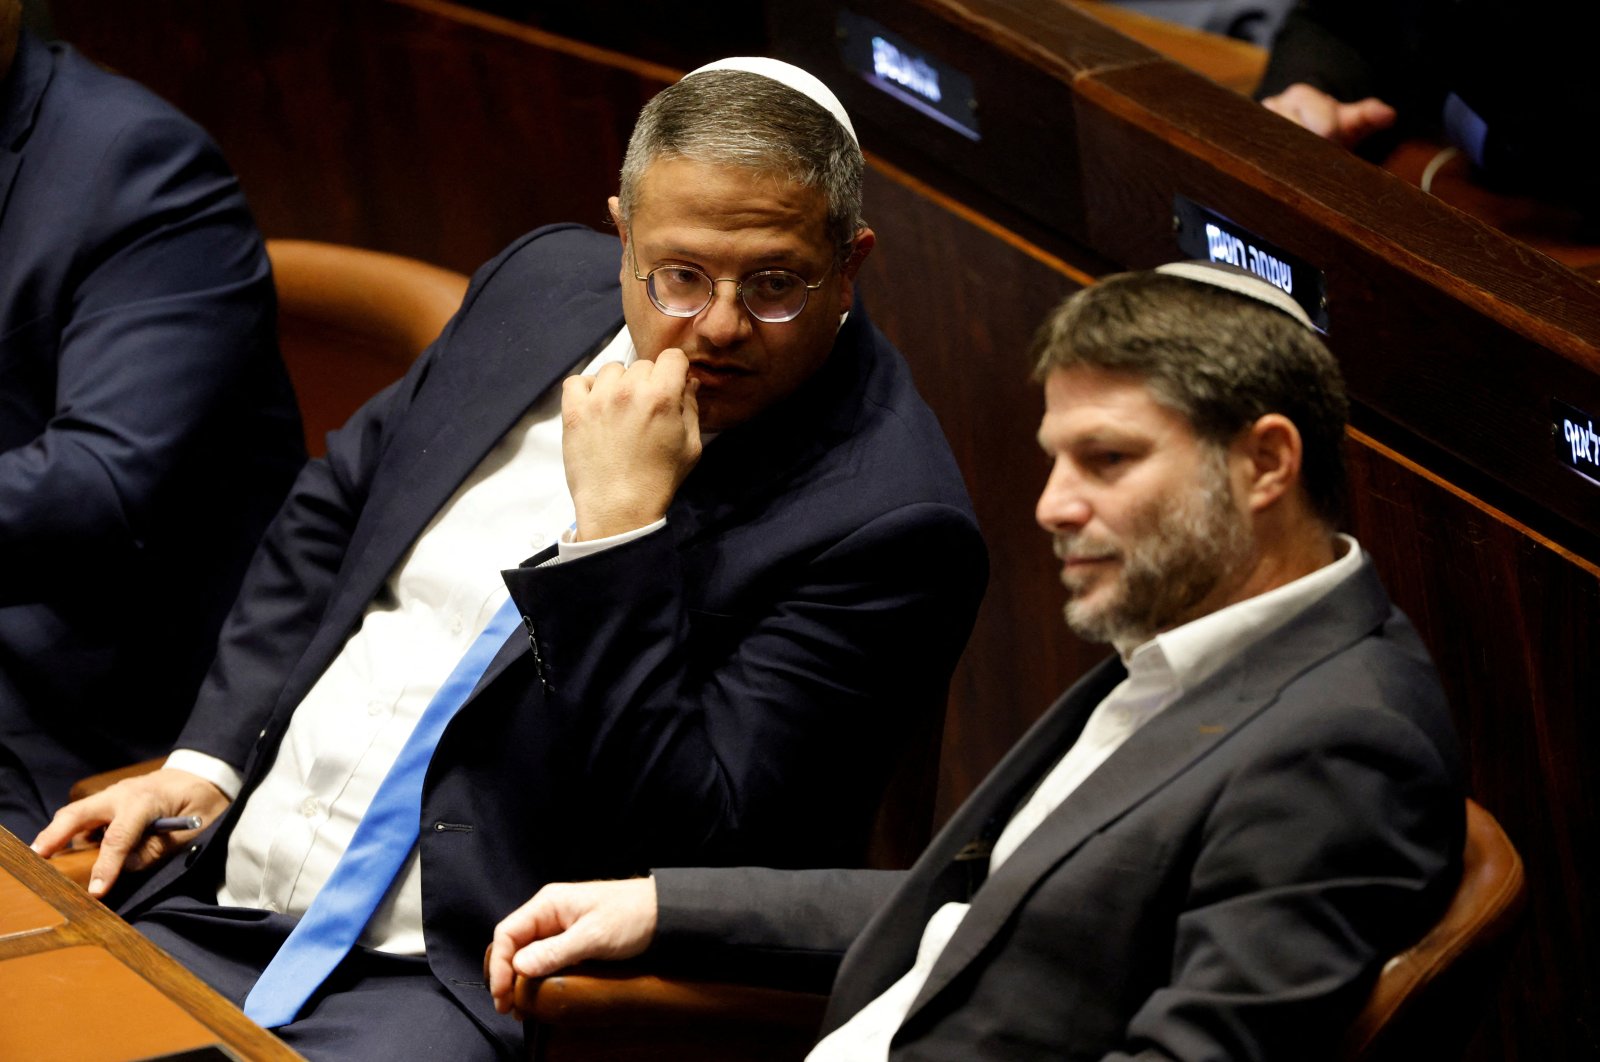 Right-wing Knesset members Itamar Ben-Gvir and Bezalel Smotrich attend a special session at the Knesset Israel&#039;s parliament, to approve and swear in a new right-wing government, in Jerusalem Dec. 29, 2022. (Reuters File Photo)